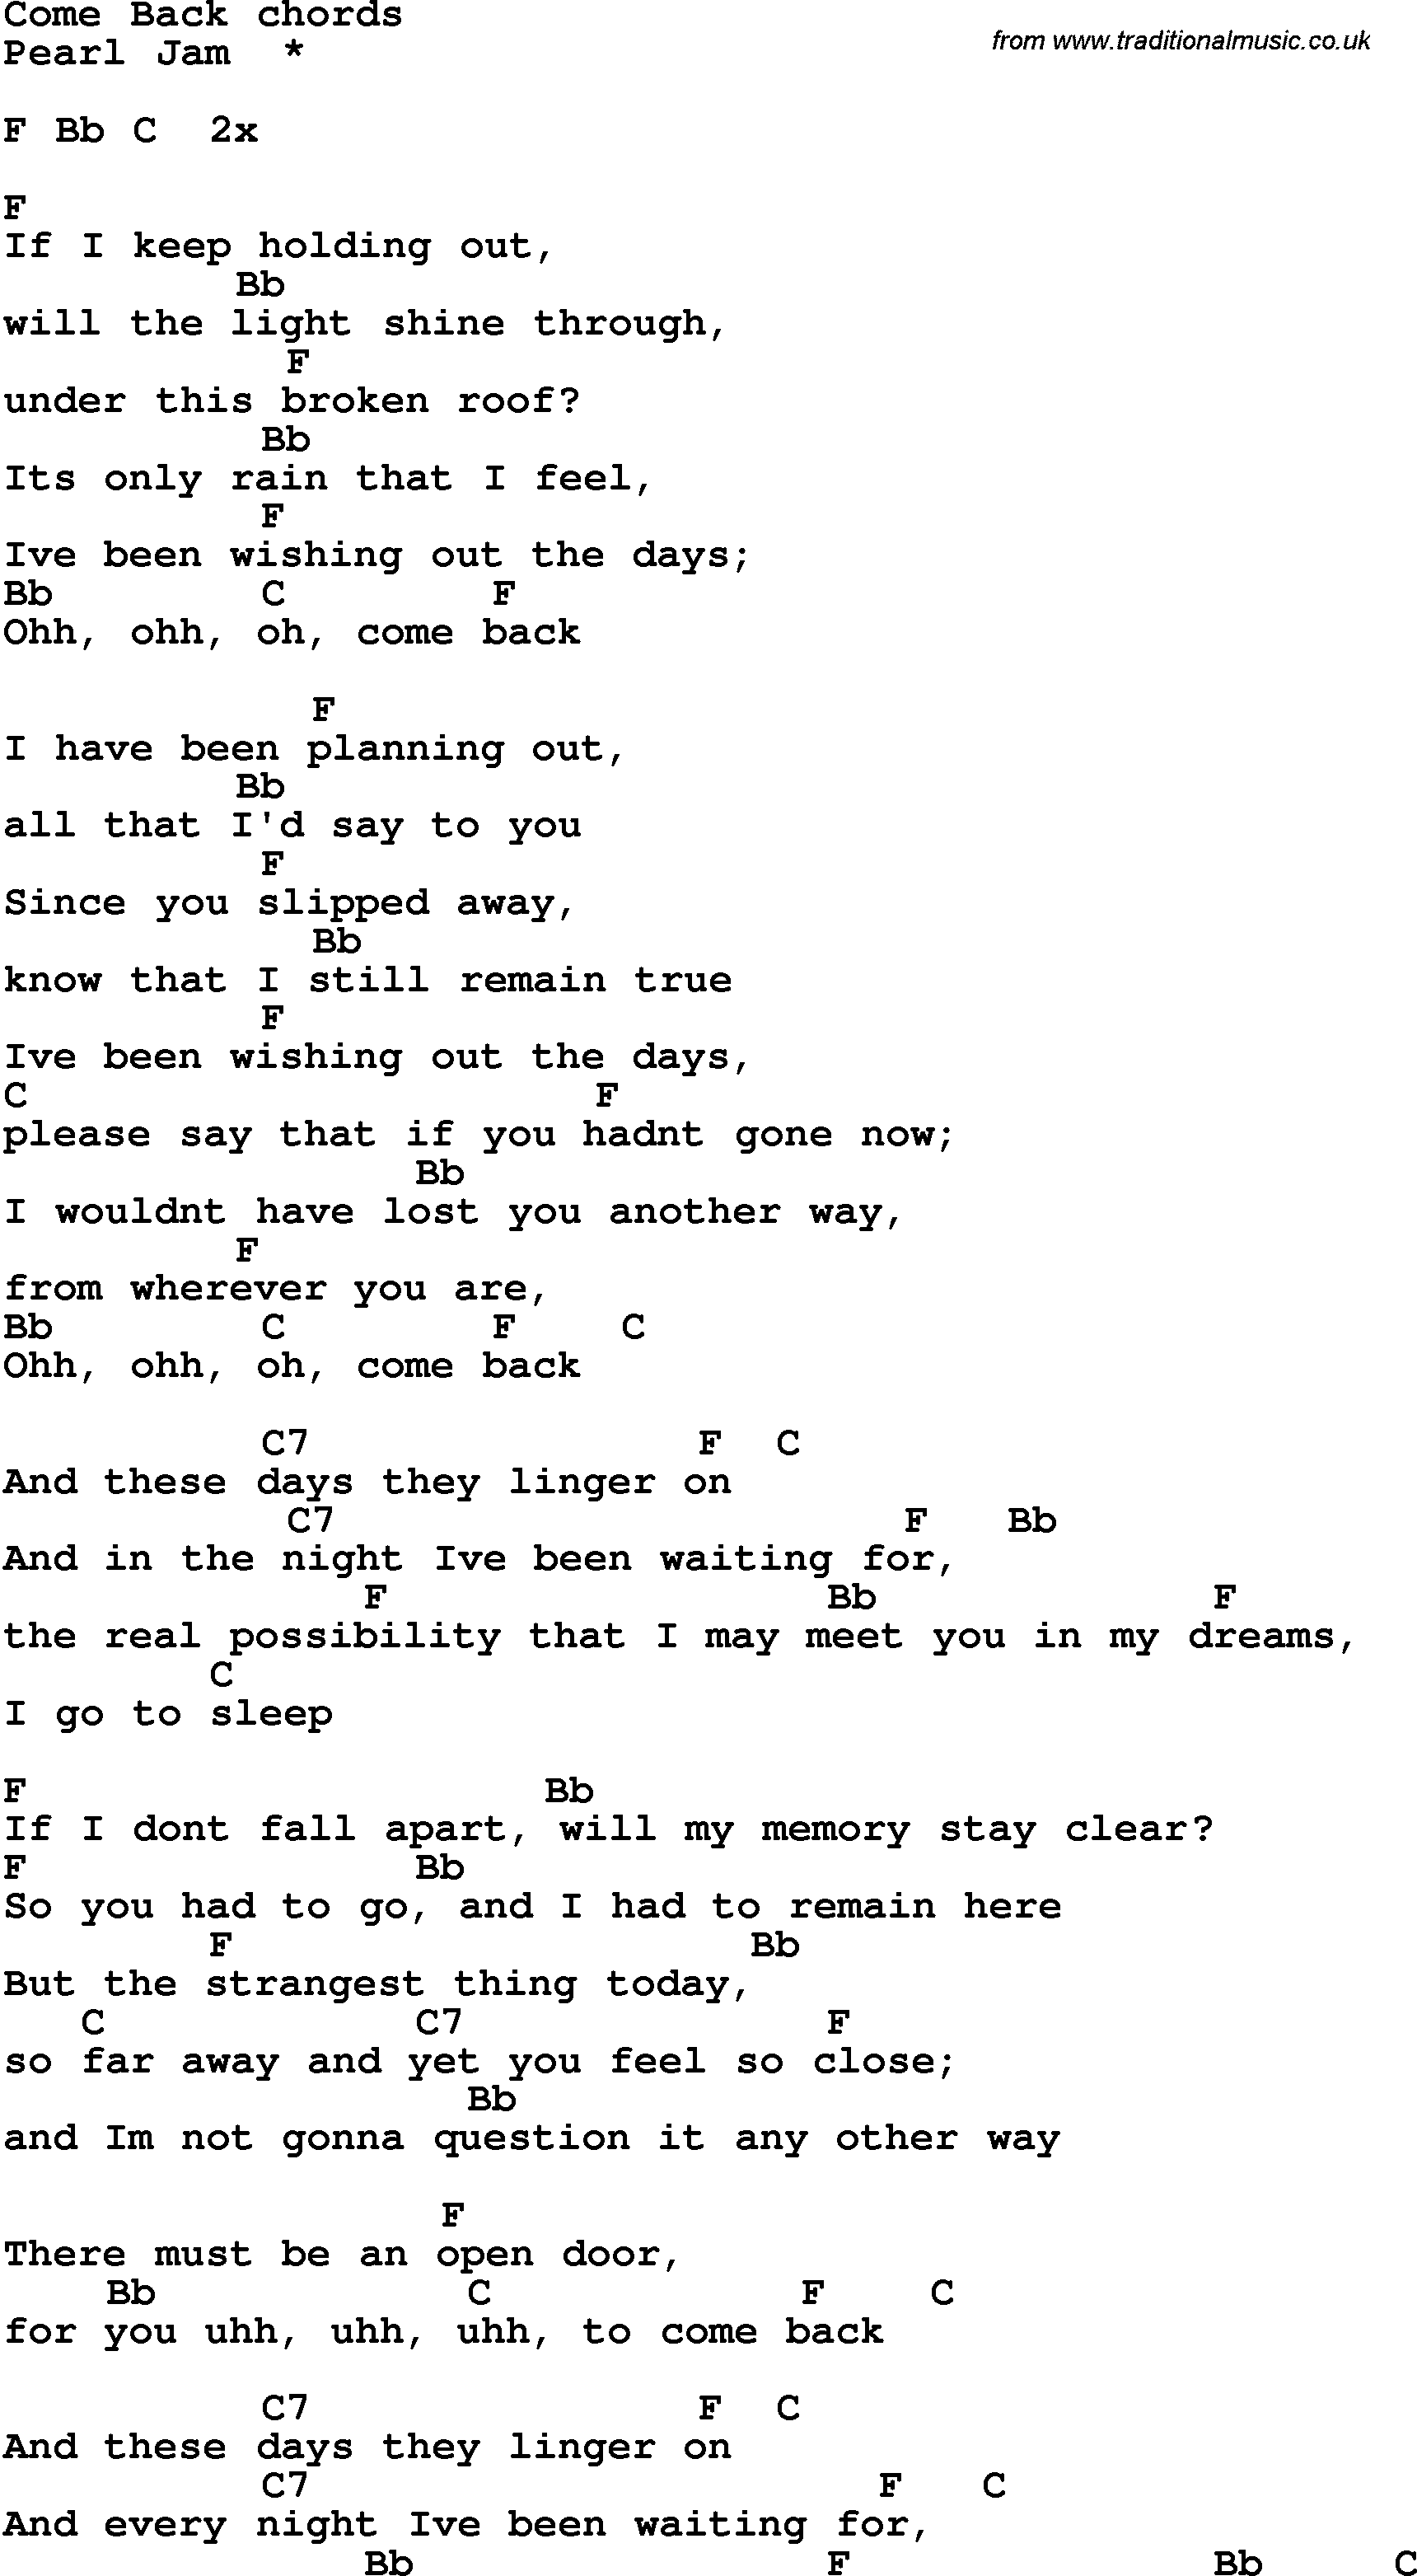 Song Lyrics with guitar chords for Come Back